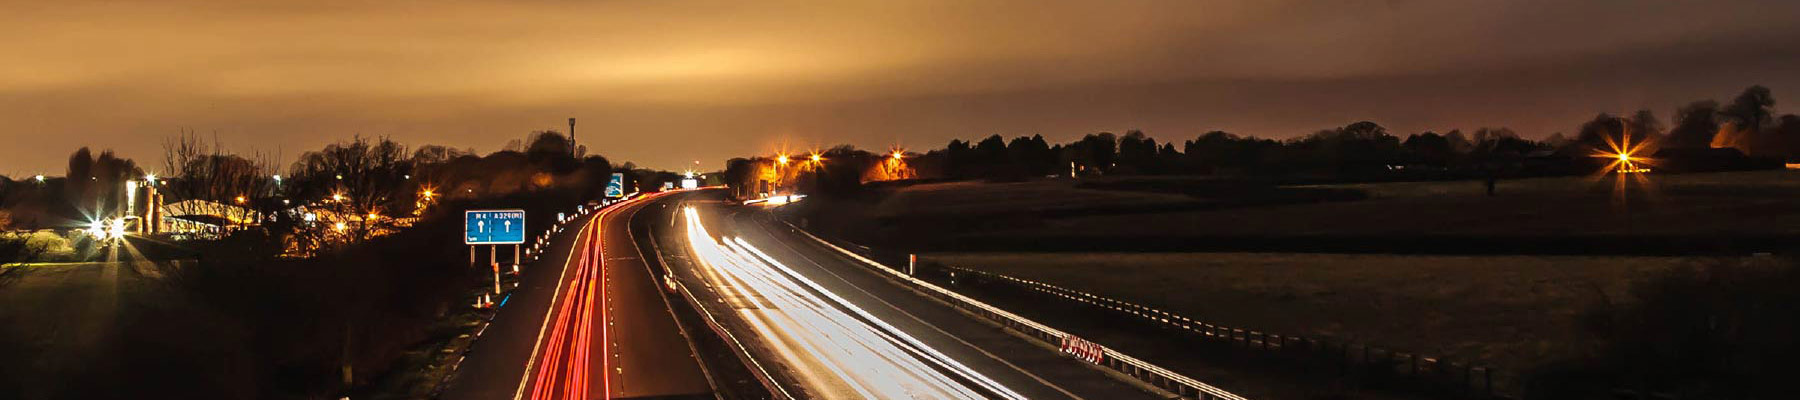 motorway at night with light trails